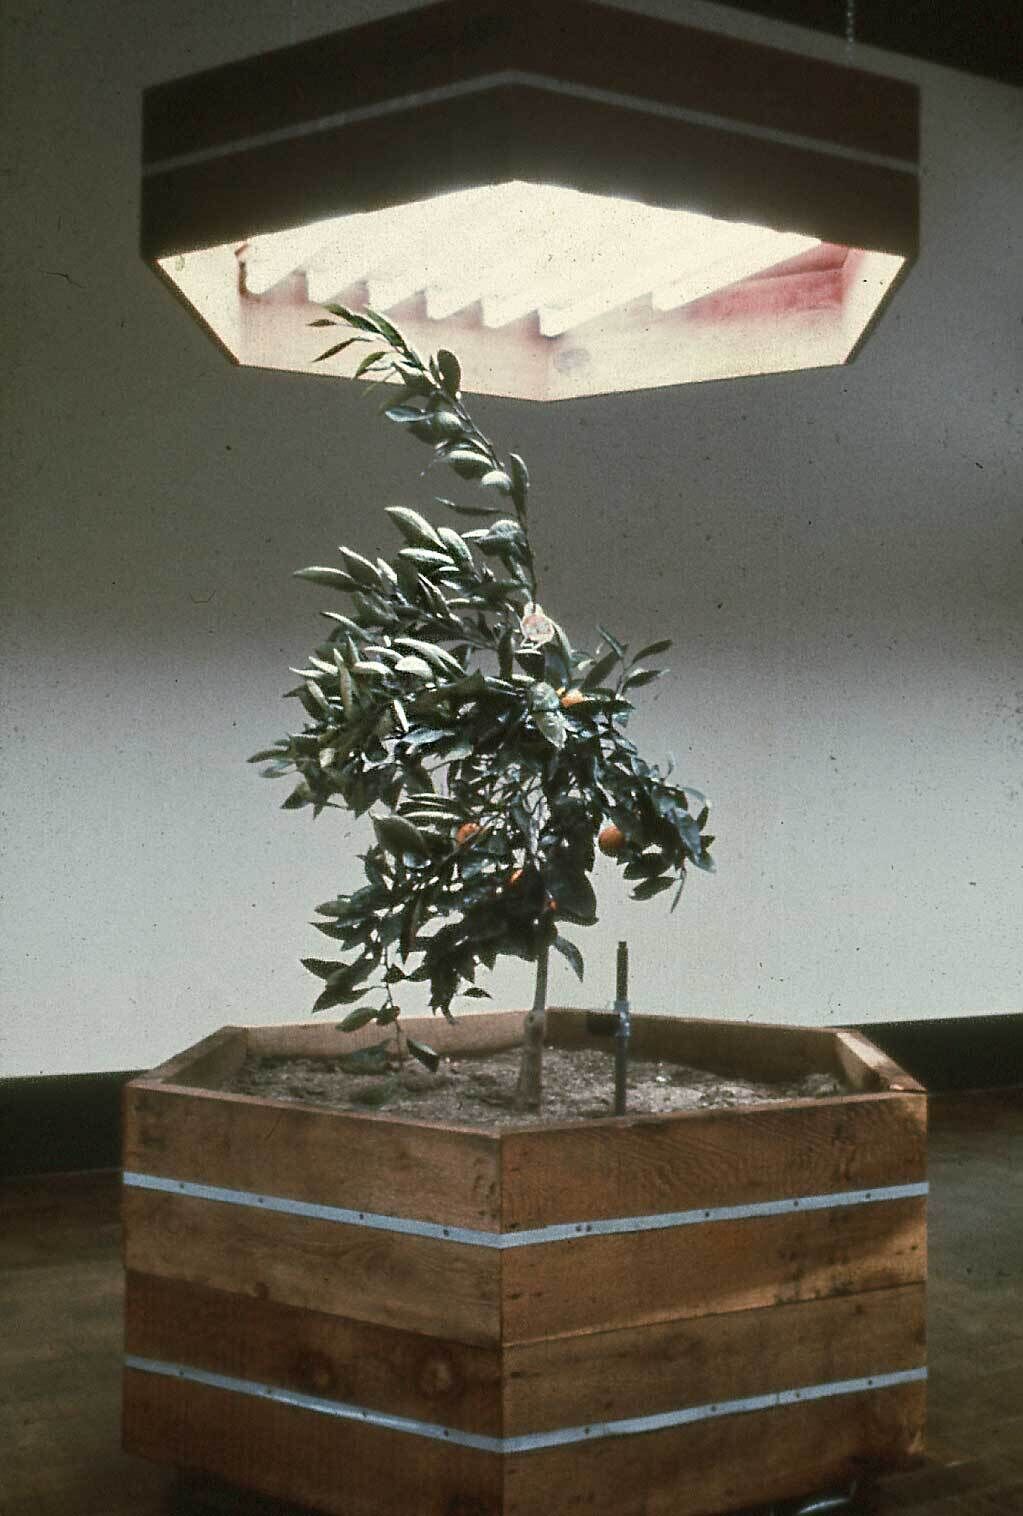 A small tree with green leaves and orange fruits grows in a wooden planter box, illuminated by a large overhead light fixture.